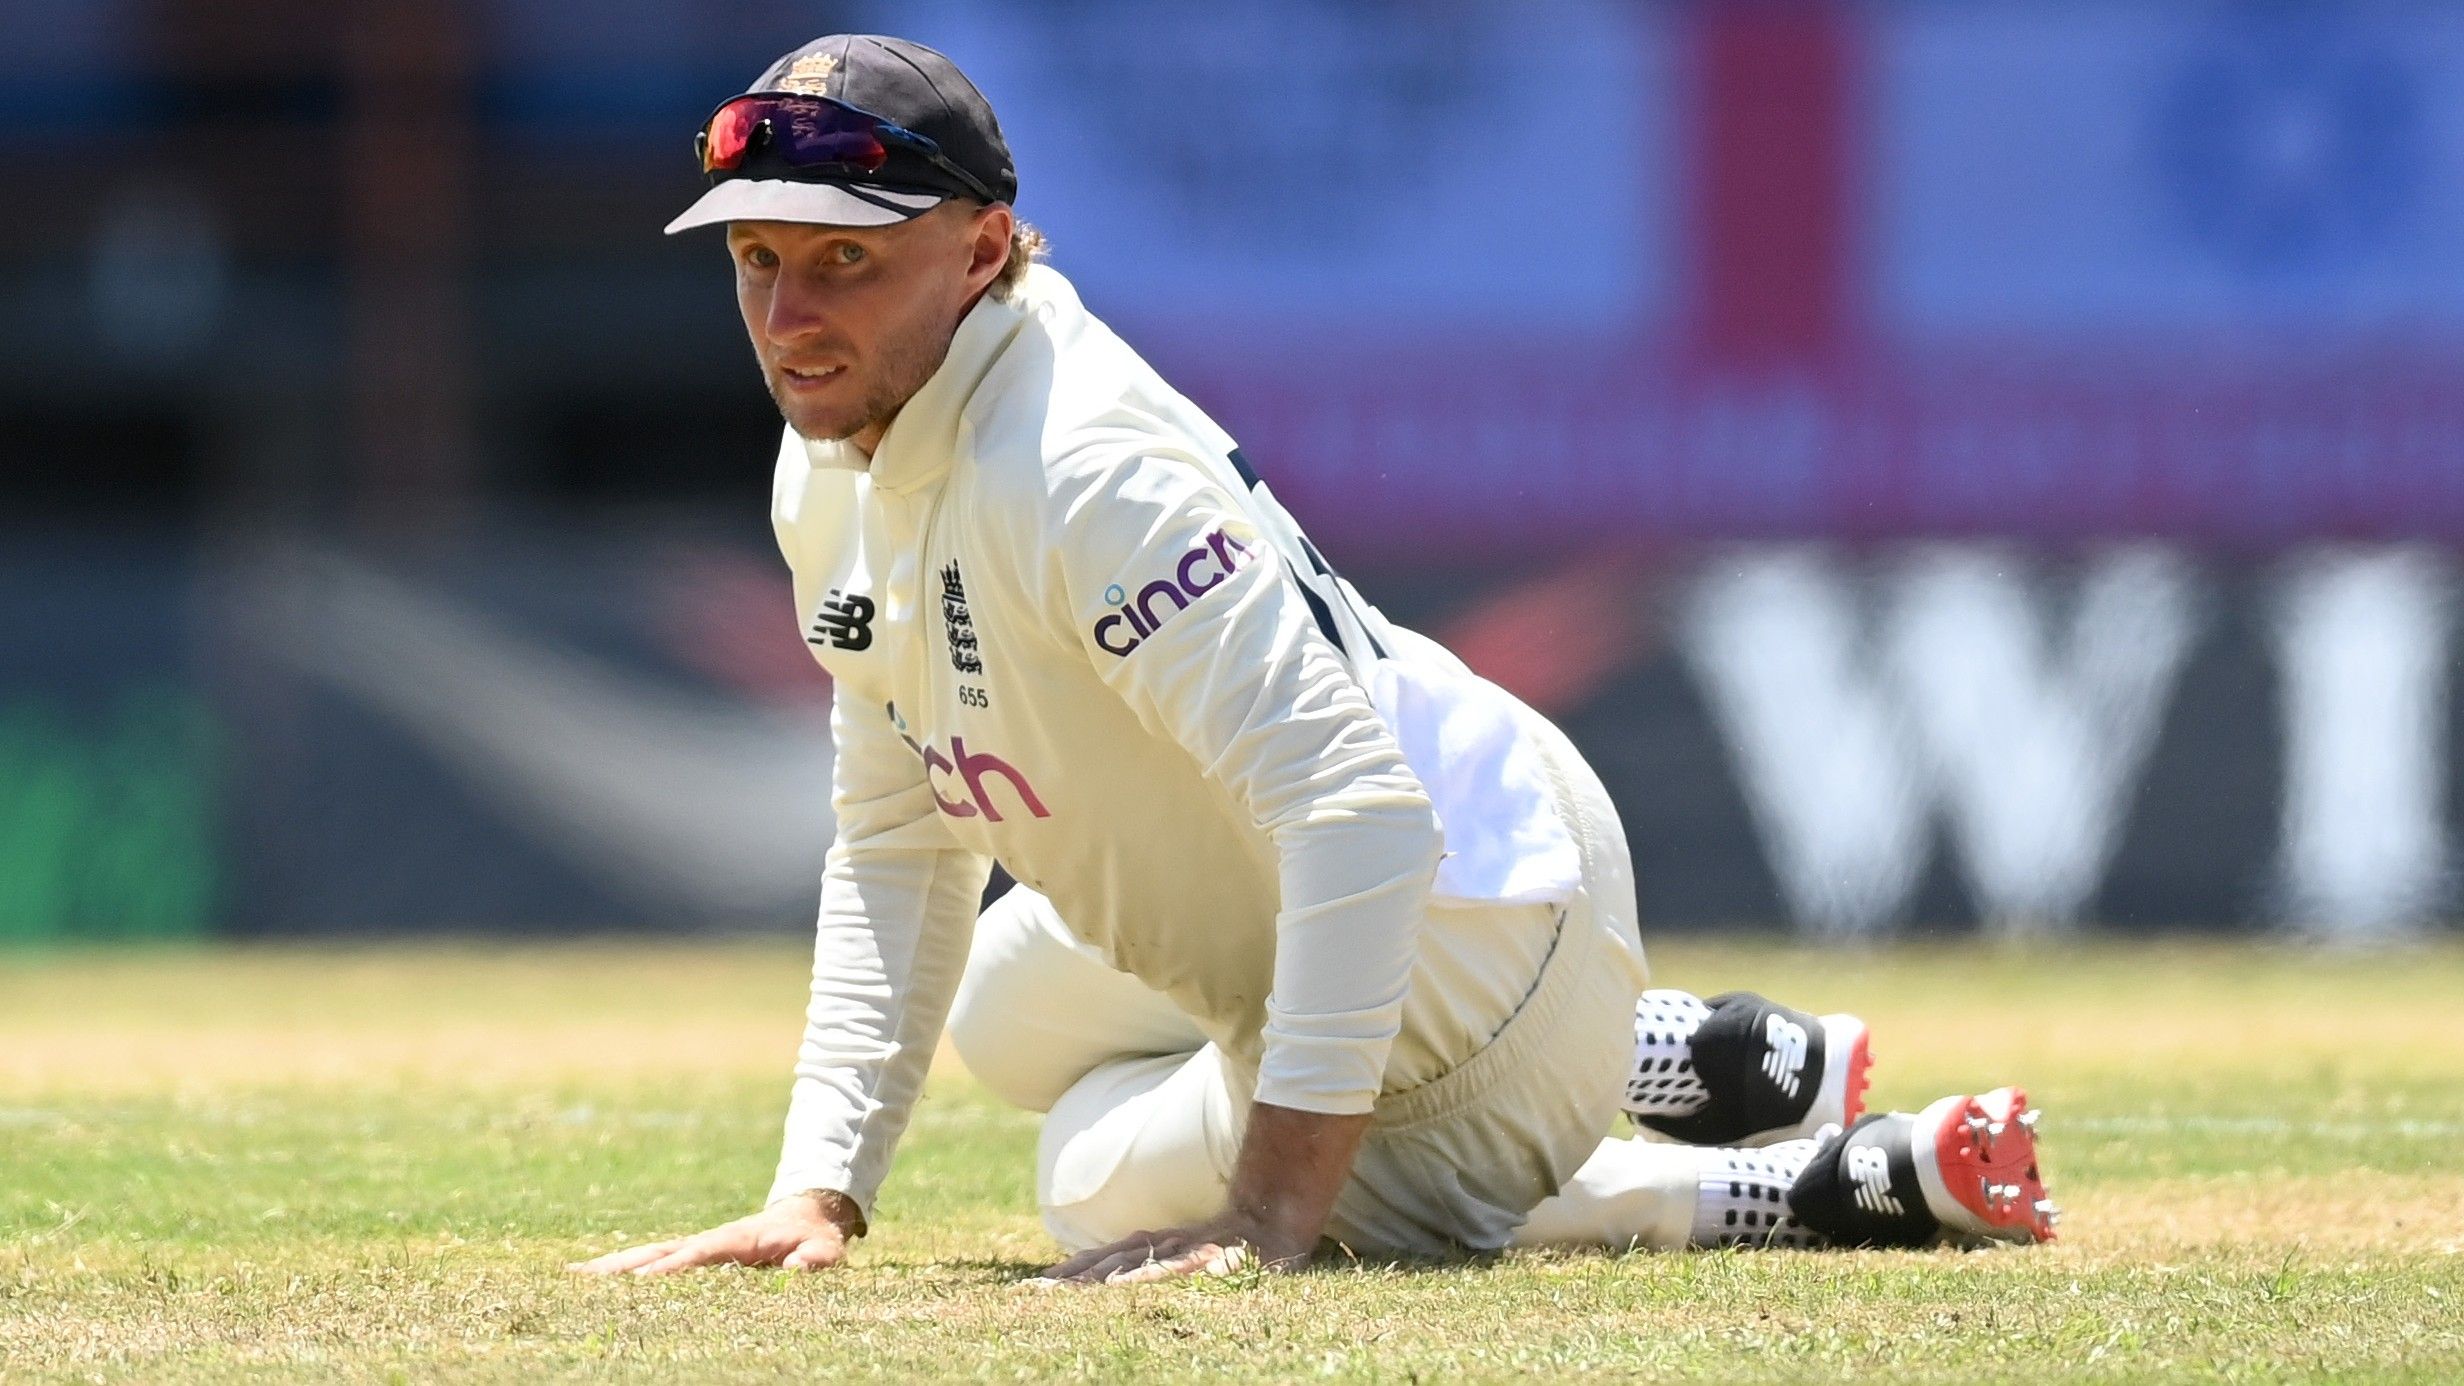 England greats say Joe Root era is over, offer Ben Stokes as short-term solution